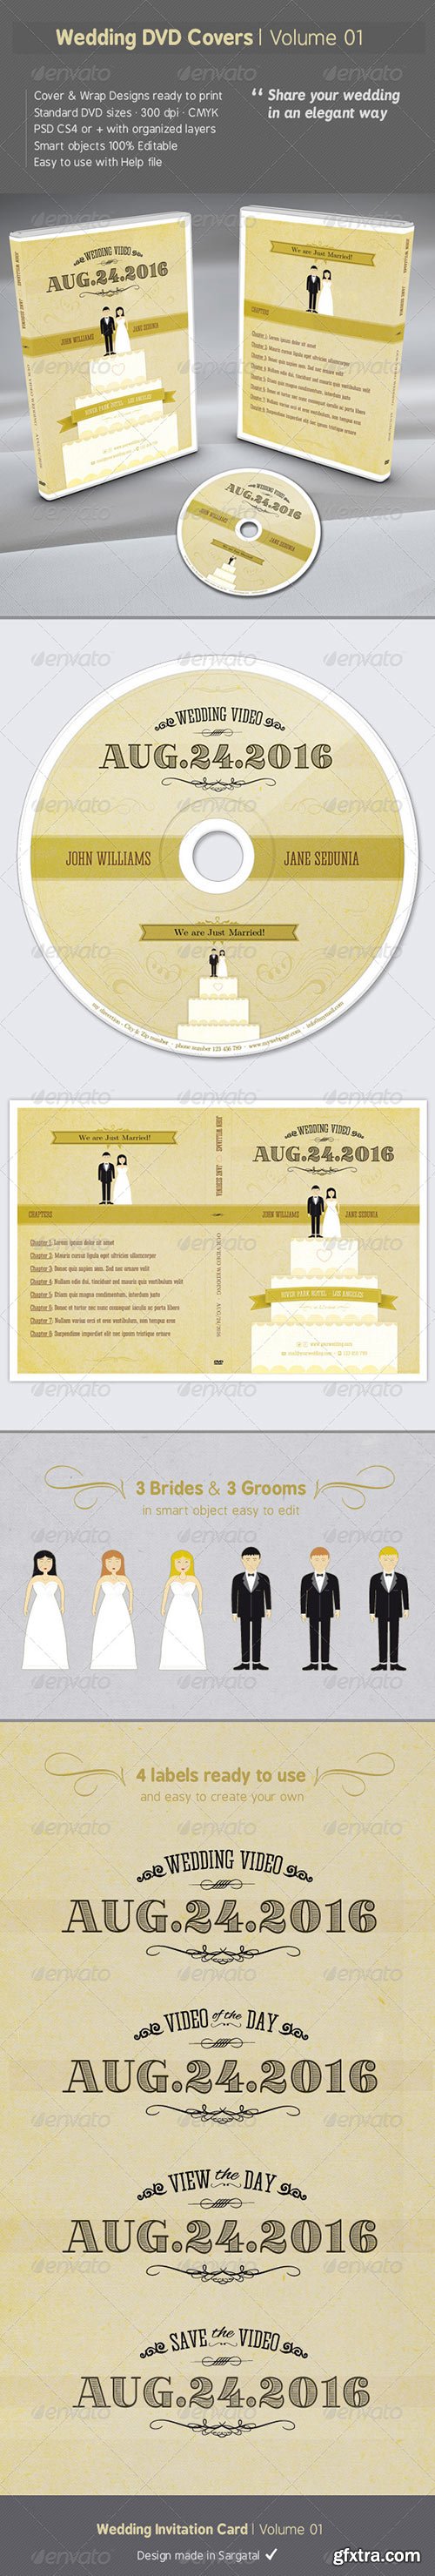 GraphicRiver - Wedding DVD Covers - Volume 01